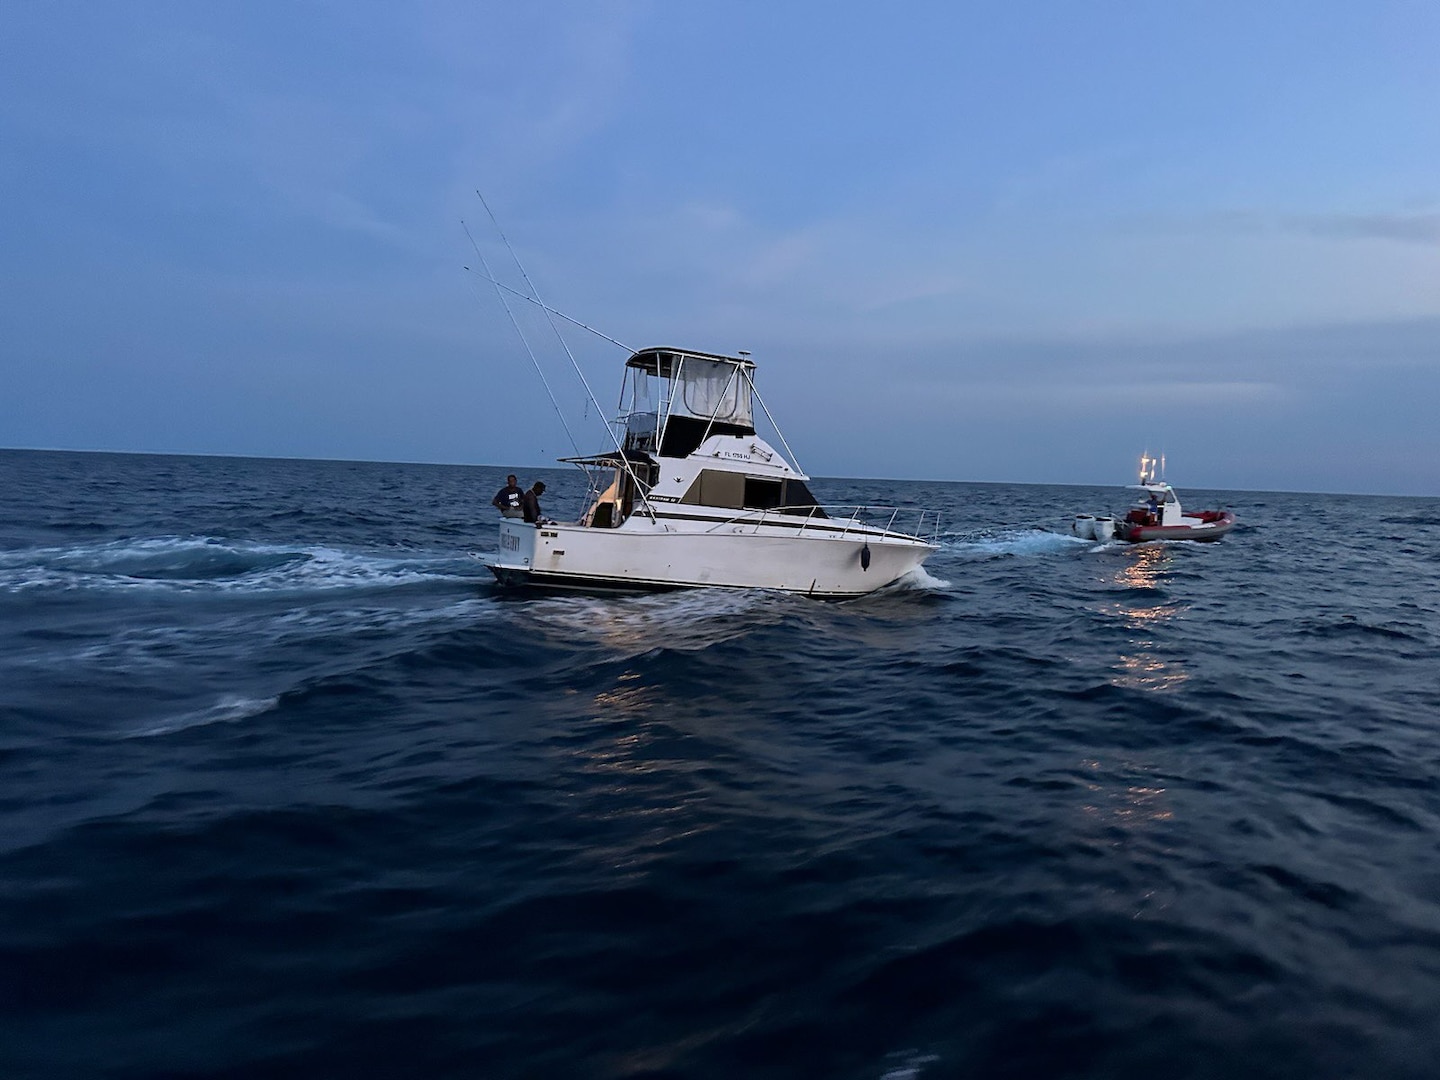 A disabled migrant vessel is interdicted while on a voyage from Freeport, Bahamas to West Palm Beach, Florida, May 5, 2023. Nineteen people were aboard the vessel and were interdicted about 25 miles east of Fort Pierce Inlet, Florida. (U.S. Coast Guard photo)